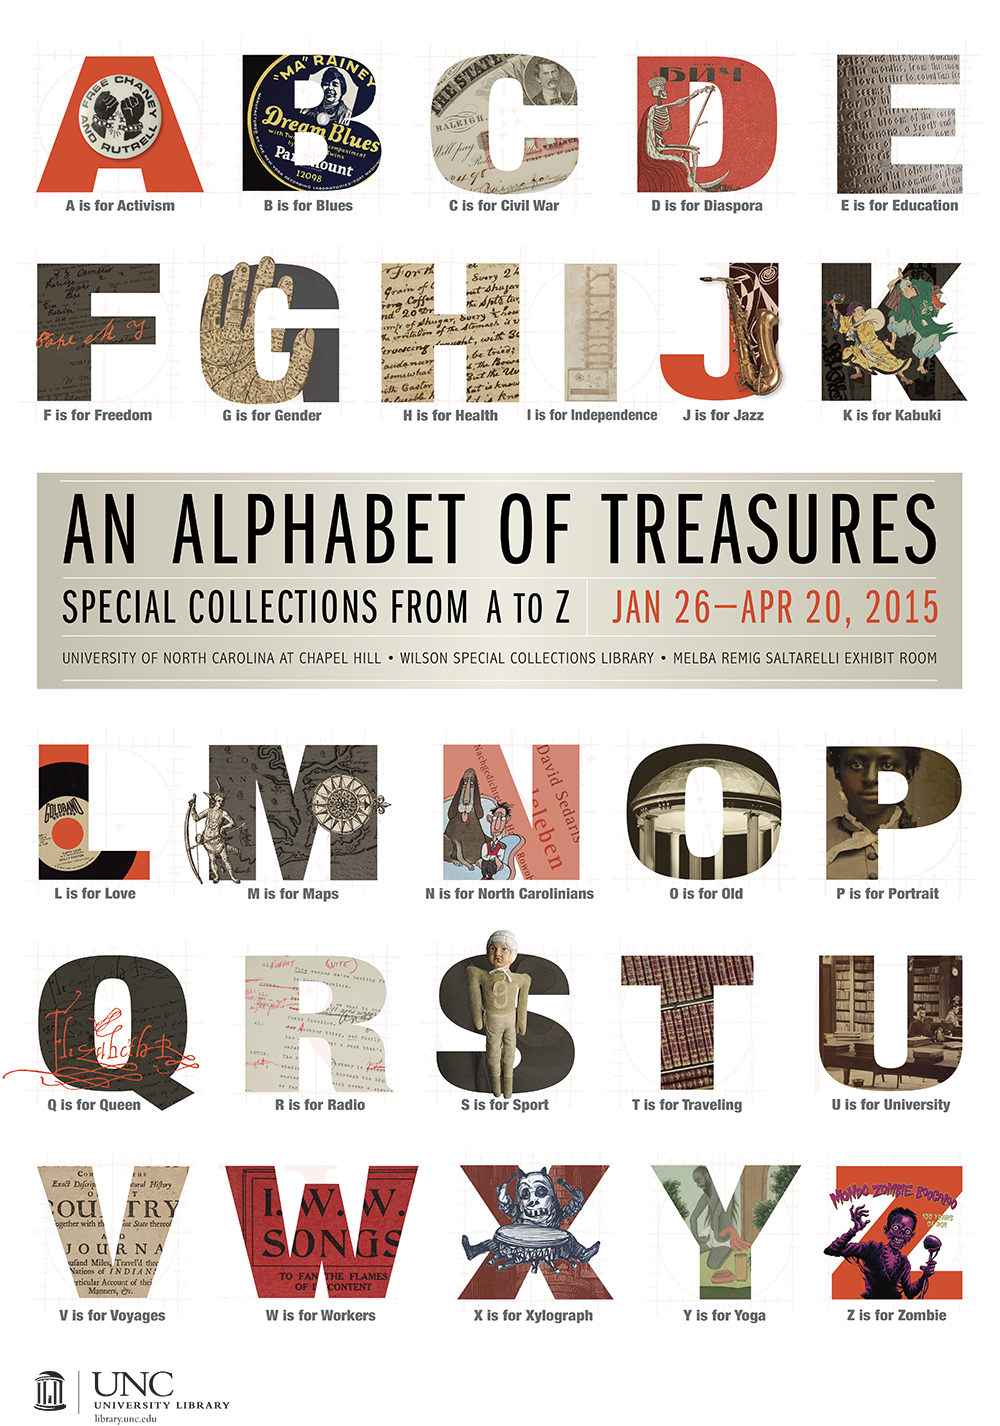 Image of all the letters of the ABC Alphabet.